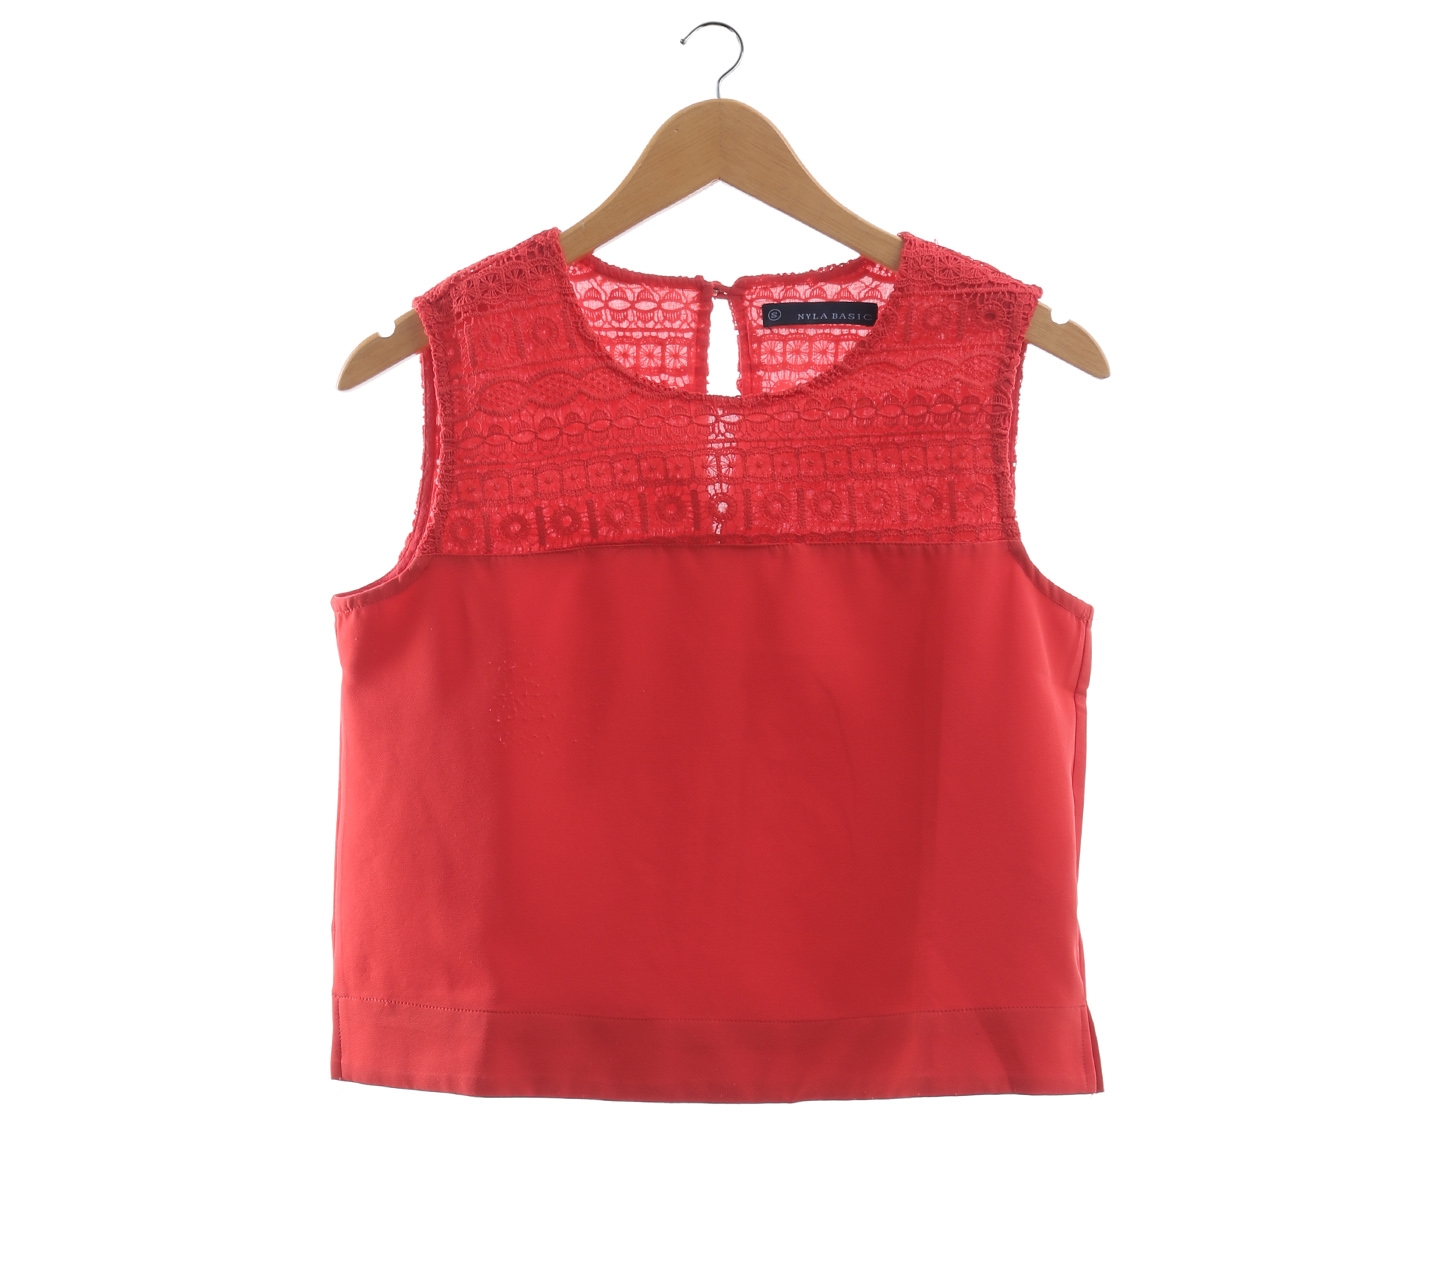 N Y L A Red Lace Sleeveless